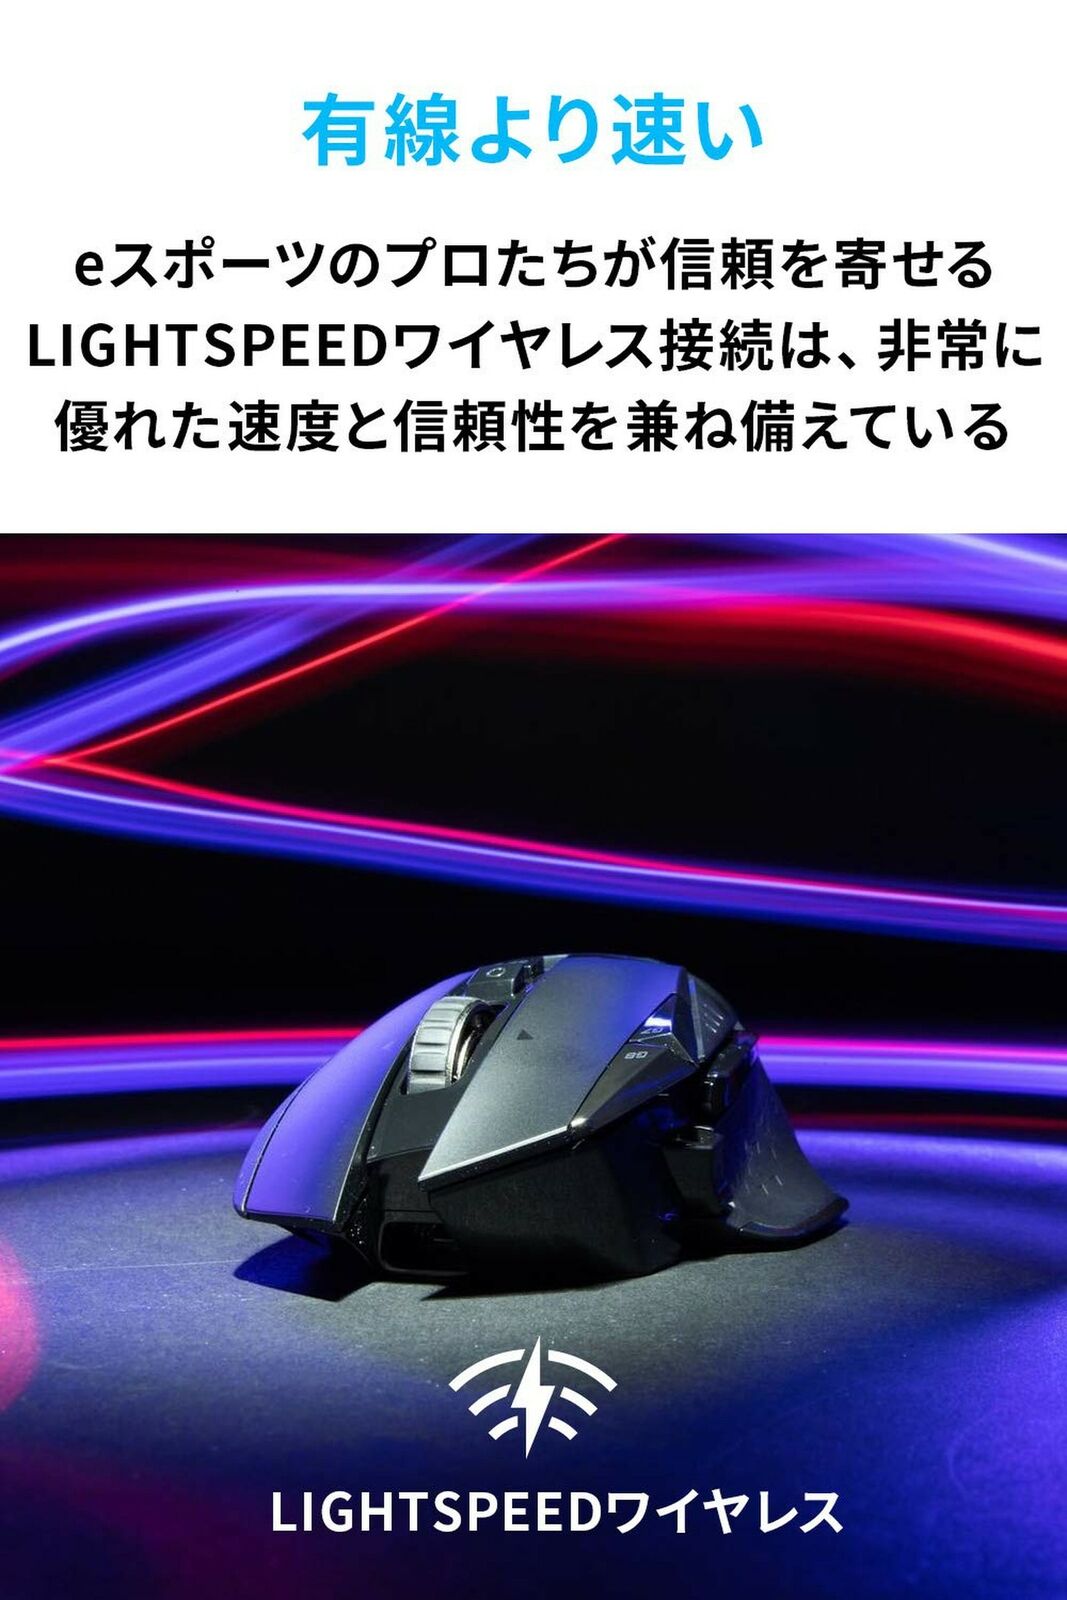 Logicool G502 WIRELESS GAMING MOUSE G502WL Japan Domestic Version New